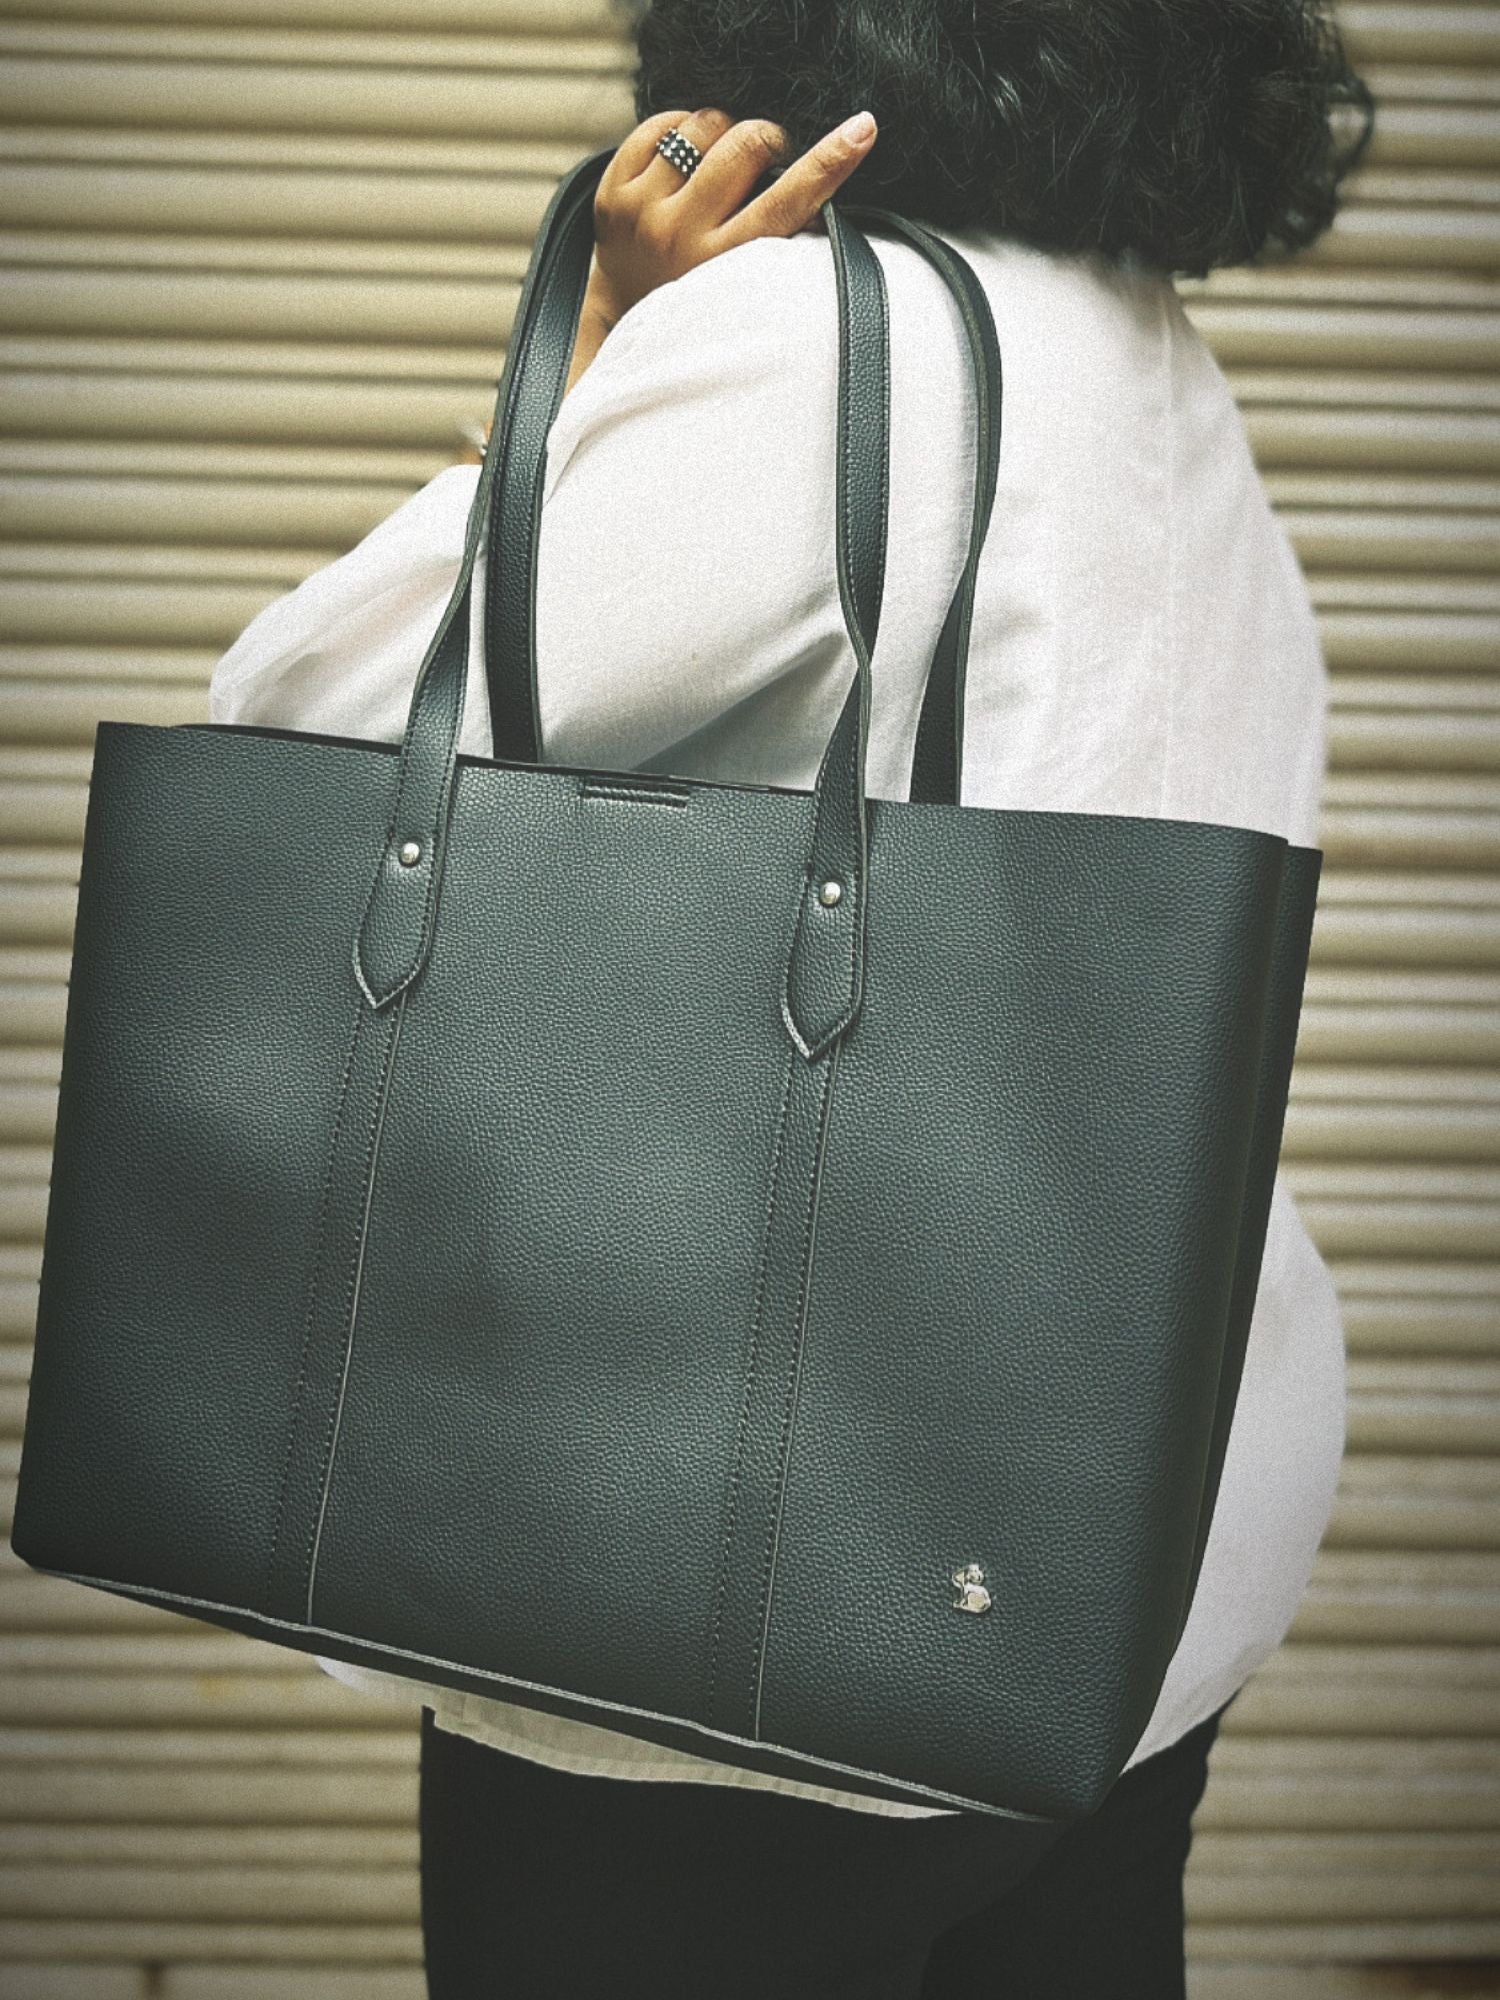 tote bags for everyday use